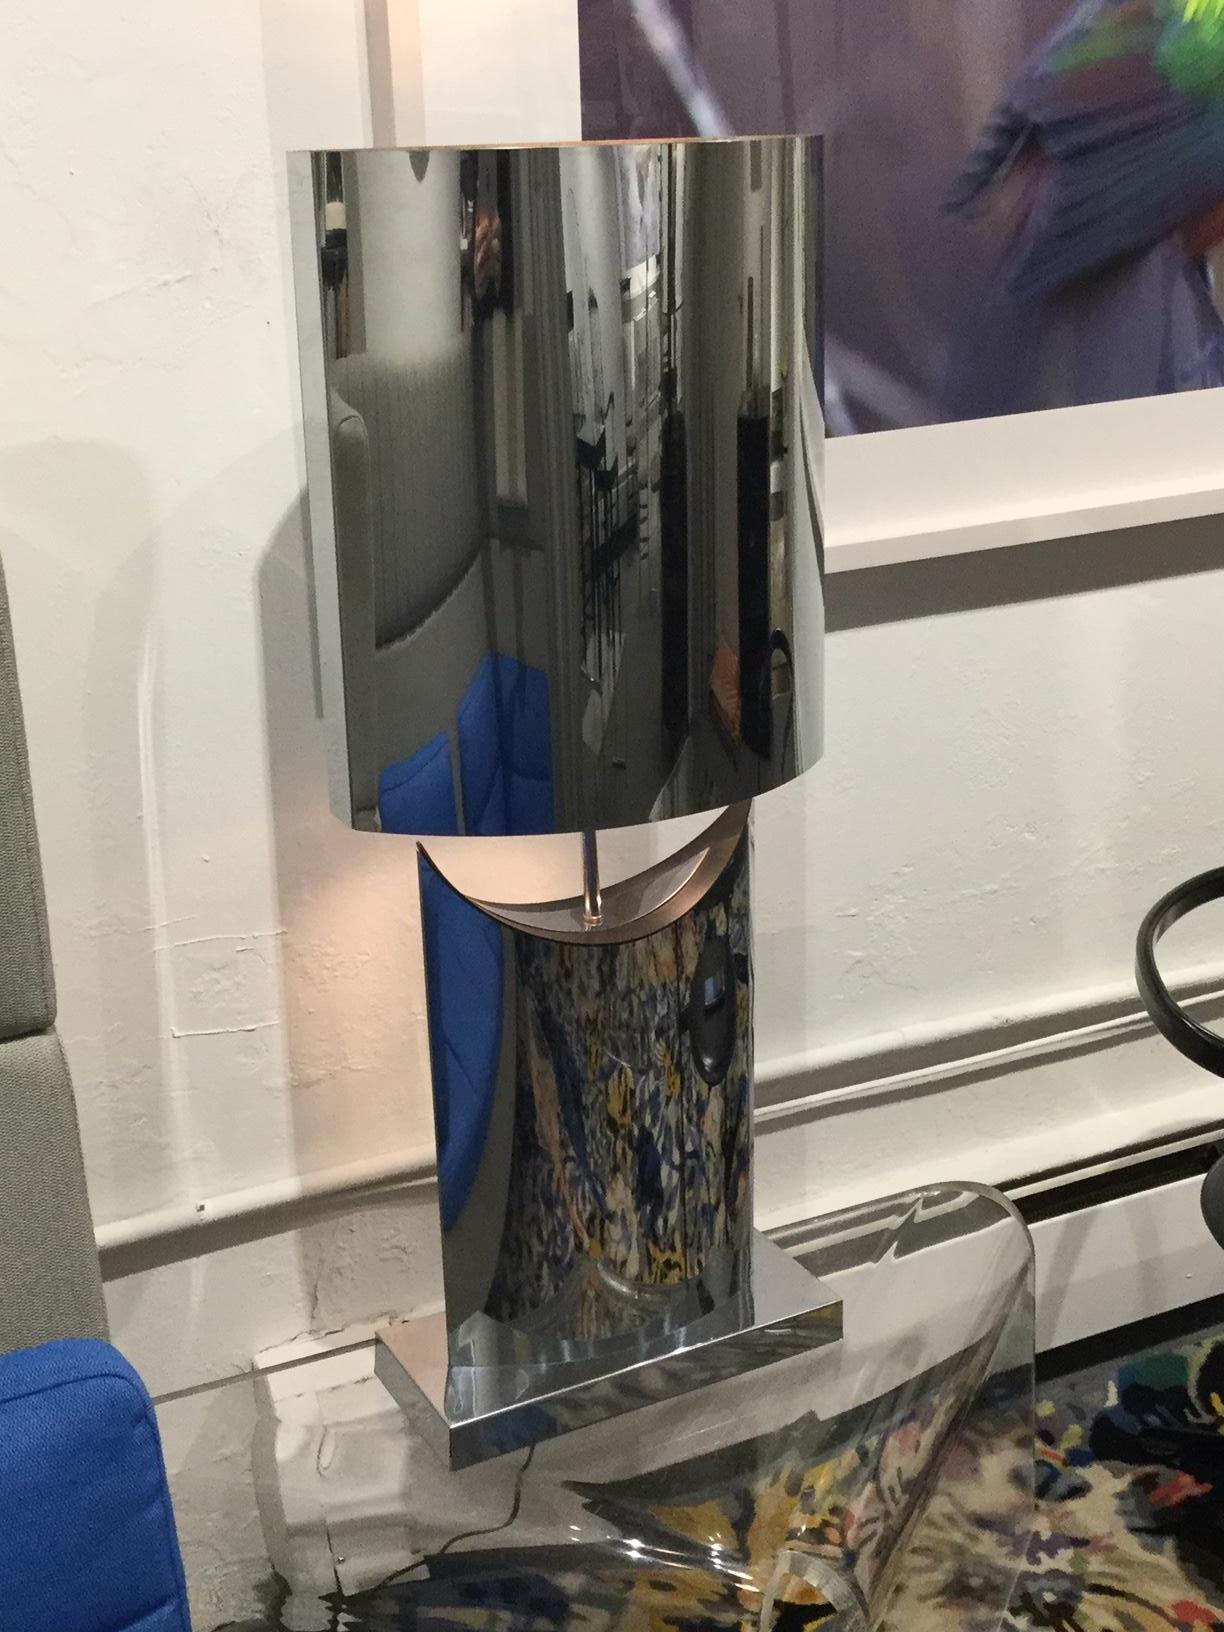 A large mirror polished stainless steel table lamp by Curtis Freiler & Jerry Fels for Curtis Jere.

C. Jeré works are made and marketed by the corporation Artisan House. Curtis Jere is a partnership of two artists Curtis Freiler and Jerry Fels.